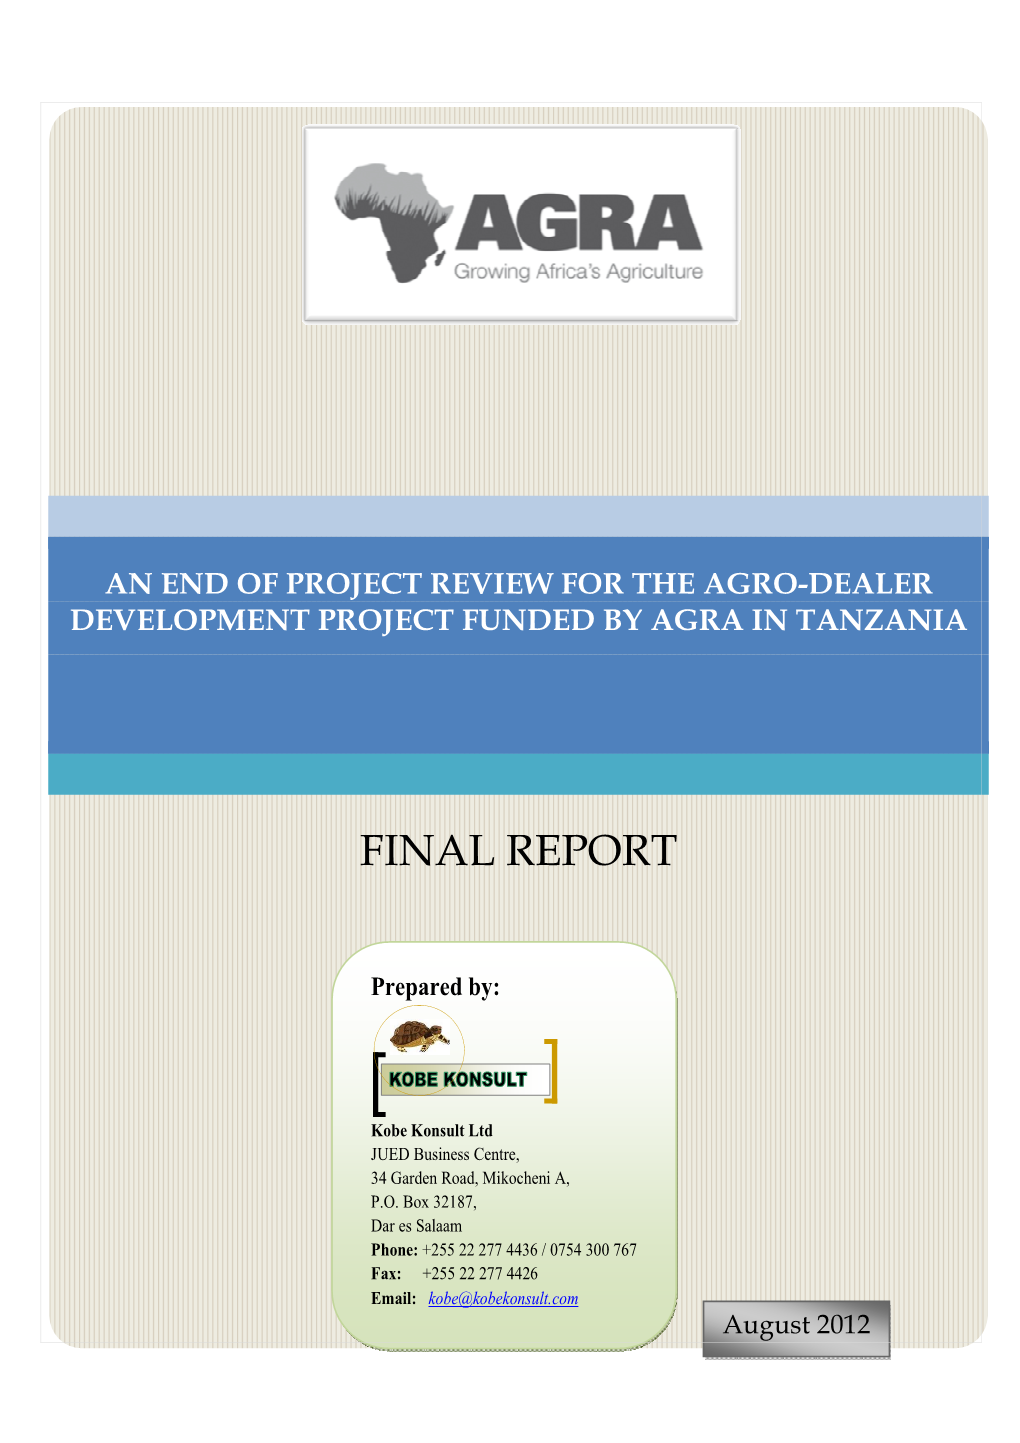 An End of Project Review for the Agro-Dealer Development Project Funded by Agra in Tanzania